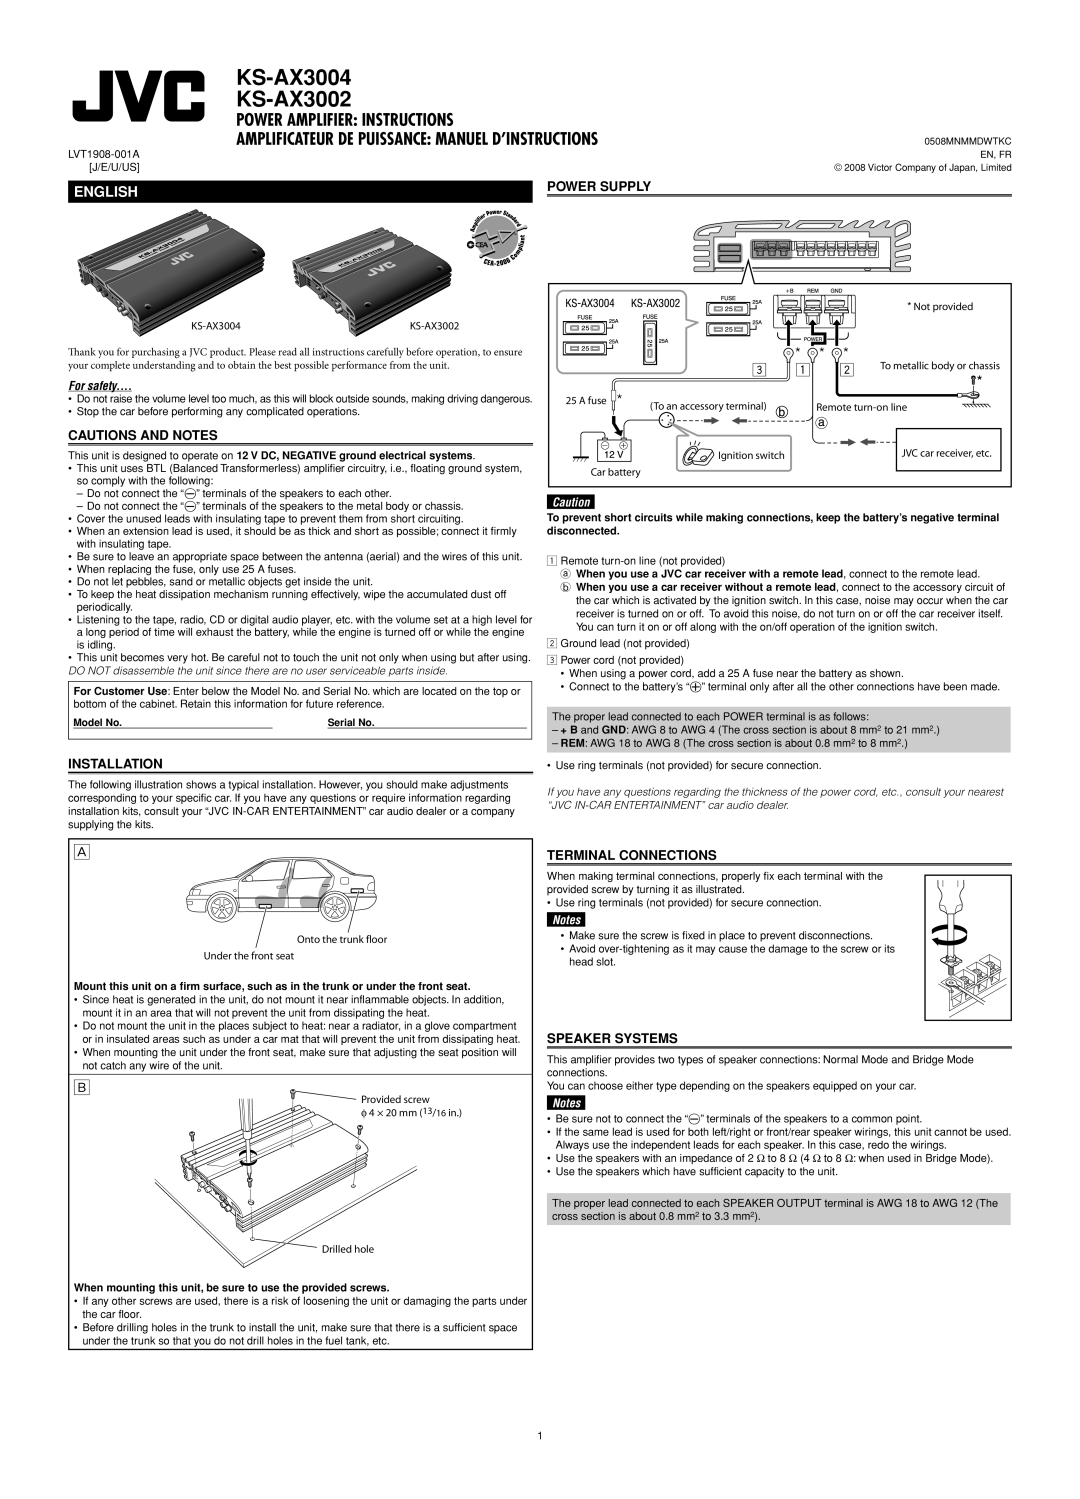 JVC KS-AX3002 user service Power Supply, Cautions And Notes, Installation, Terminal Connections, Speaker Systems, English 